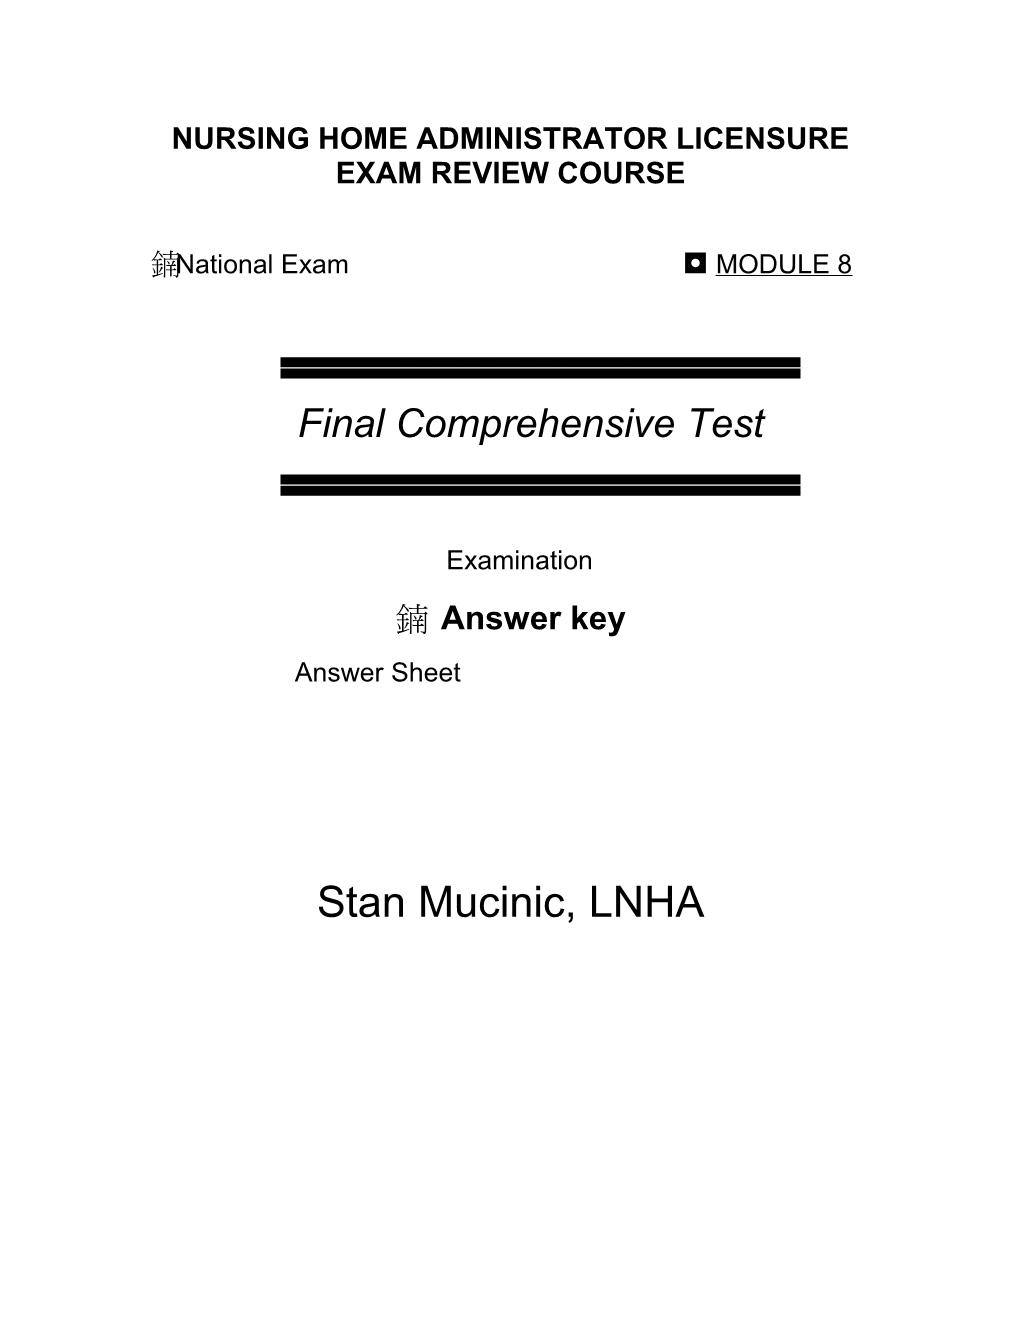 National Exam Quick Review Sheet - Answers